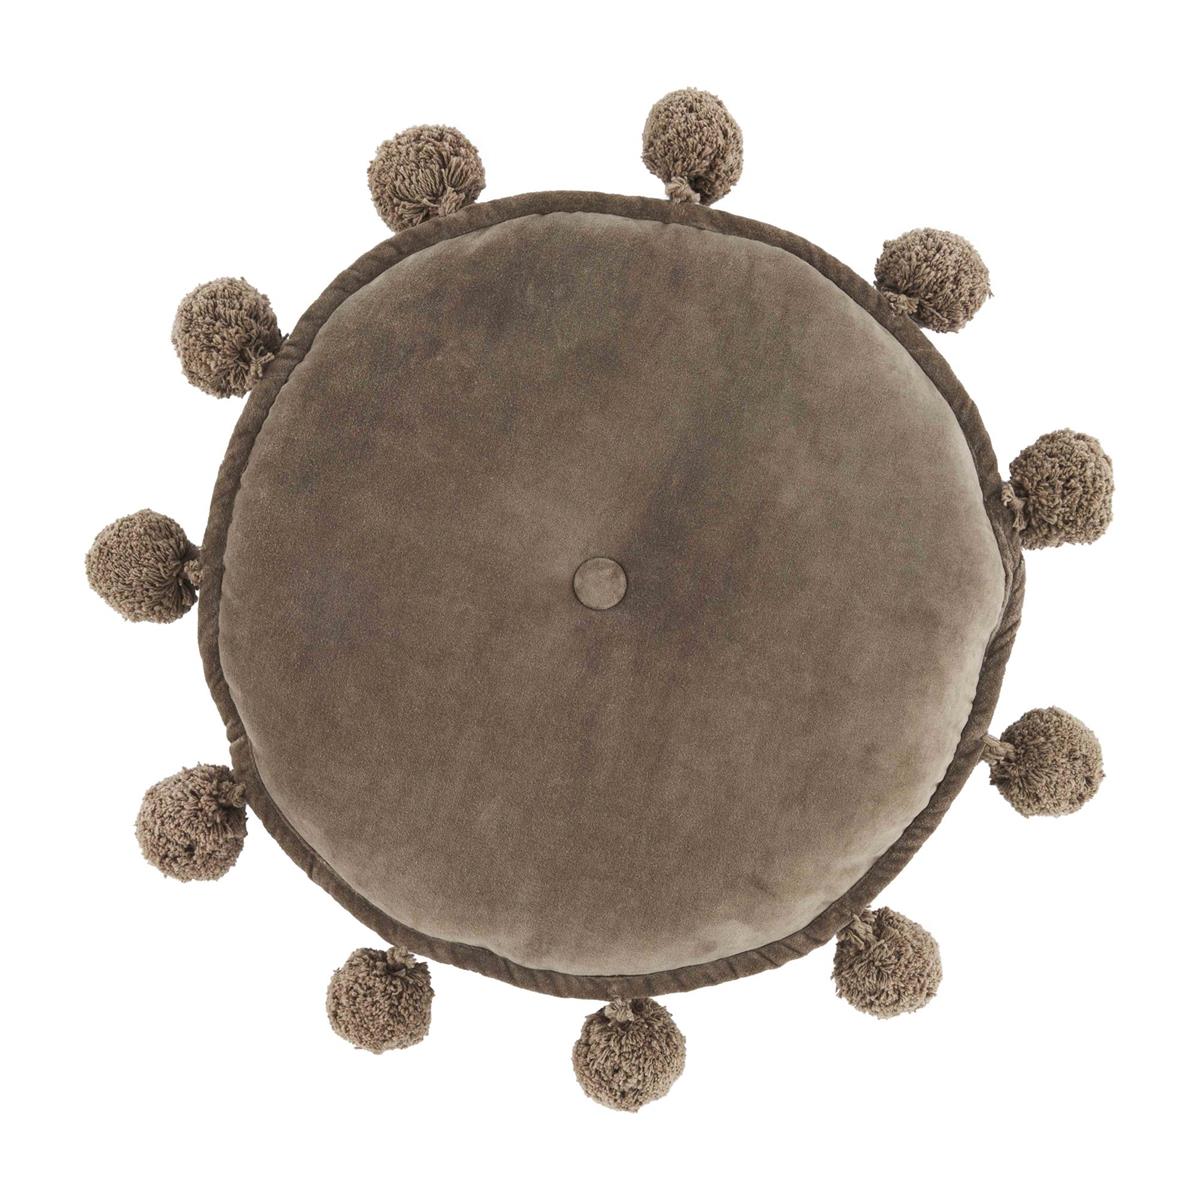 taupe round pillow with yarn poms around the circumference.